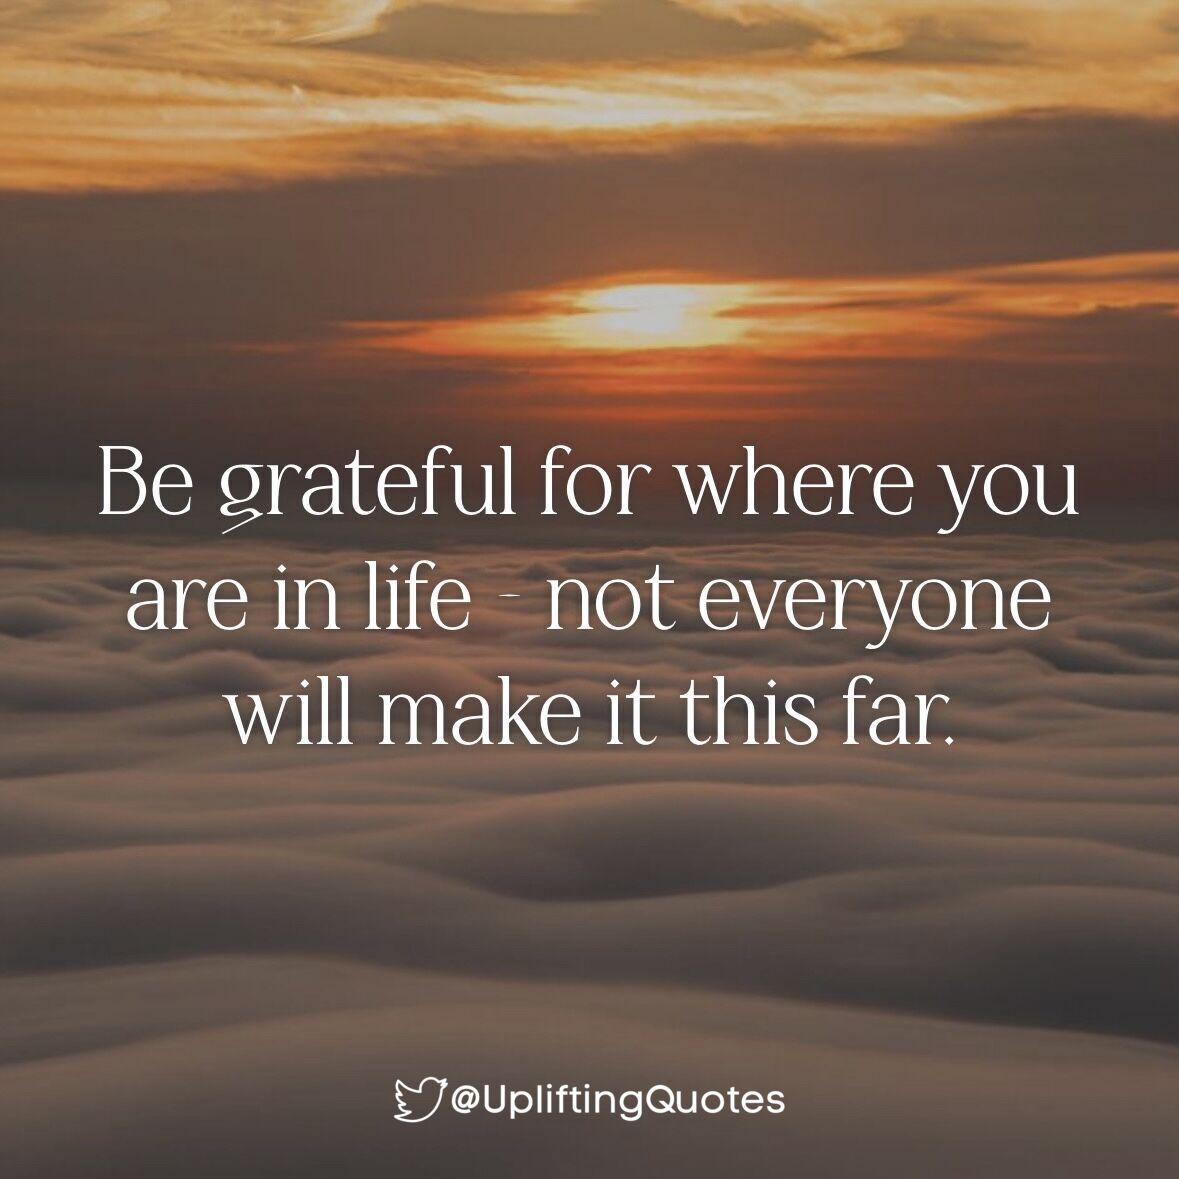 Be grateful for where you are in life - not everyone will make it this far. #quotes #upliftingquotes #quoteoftheday #motivational #inspiration #positivevibes